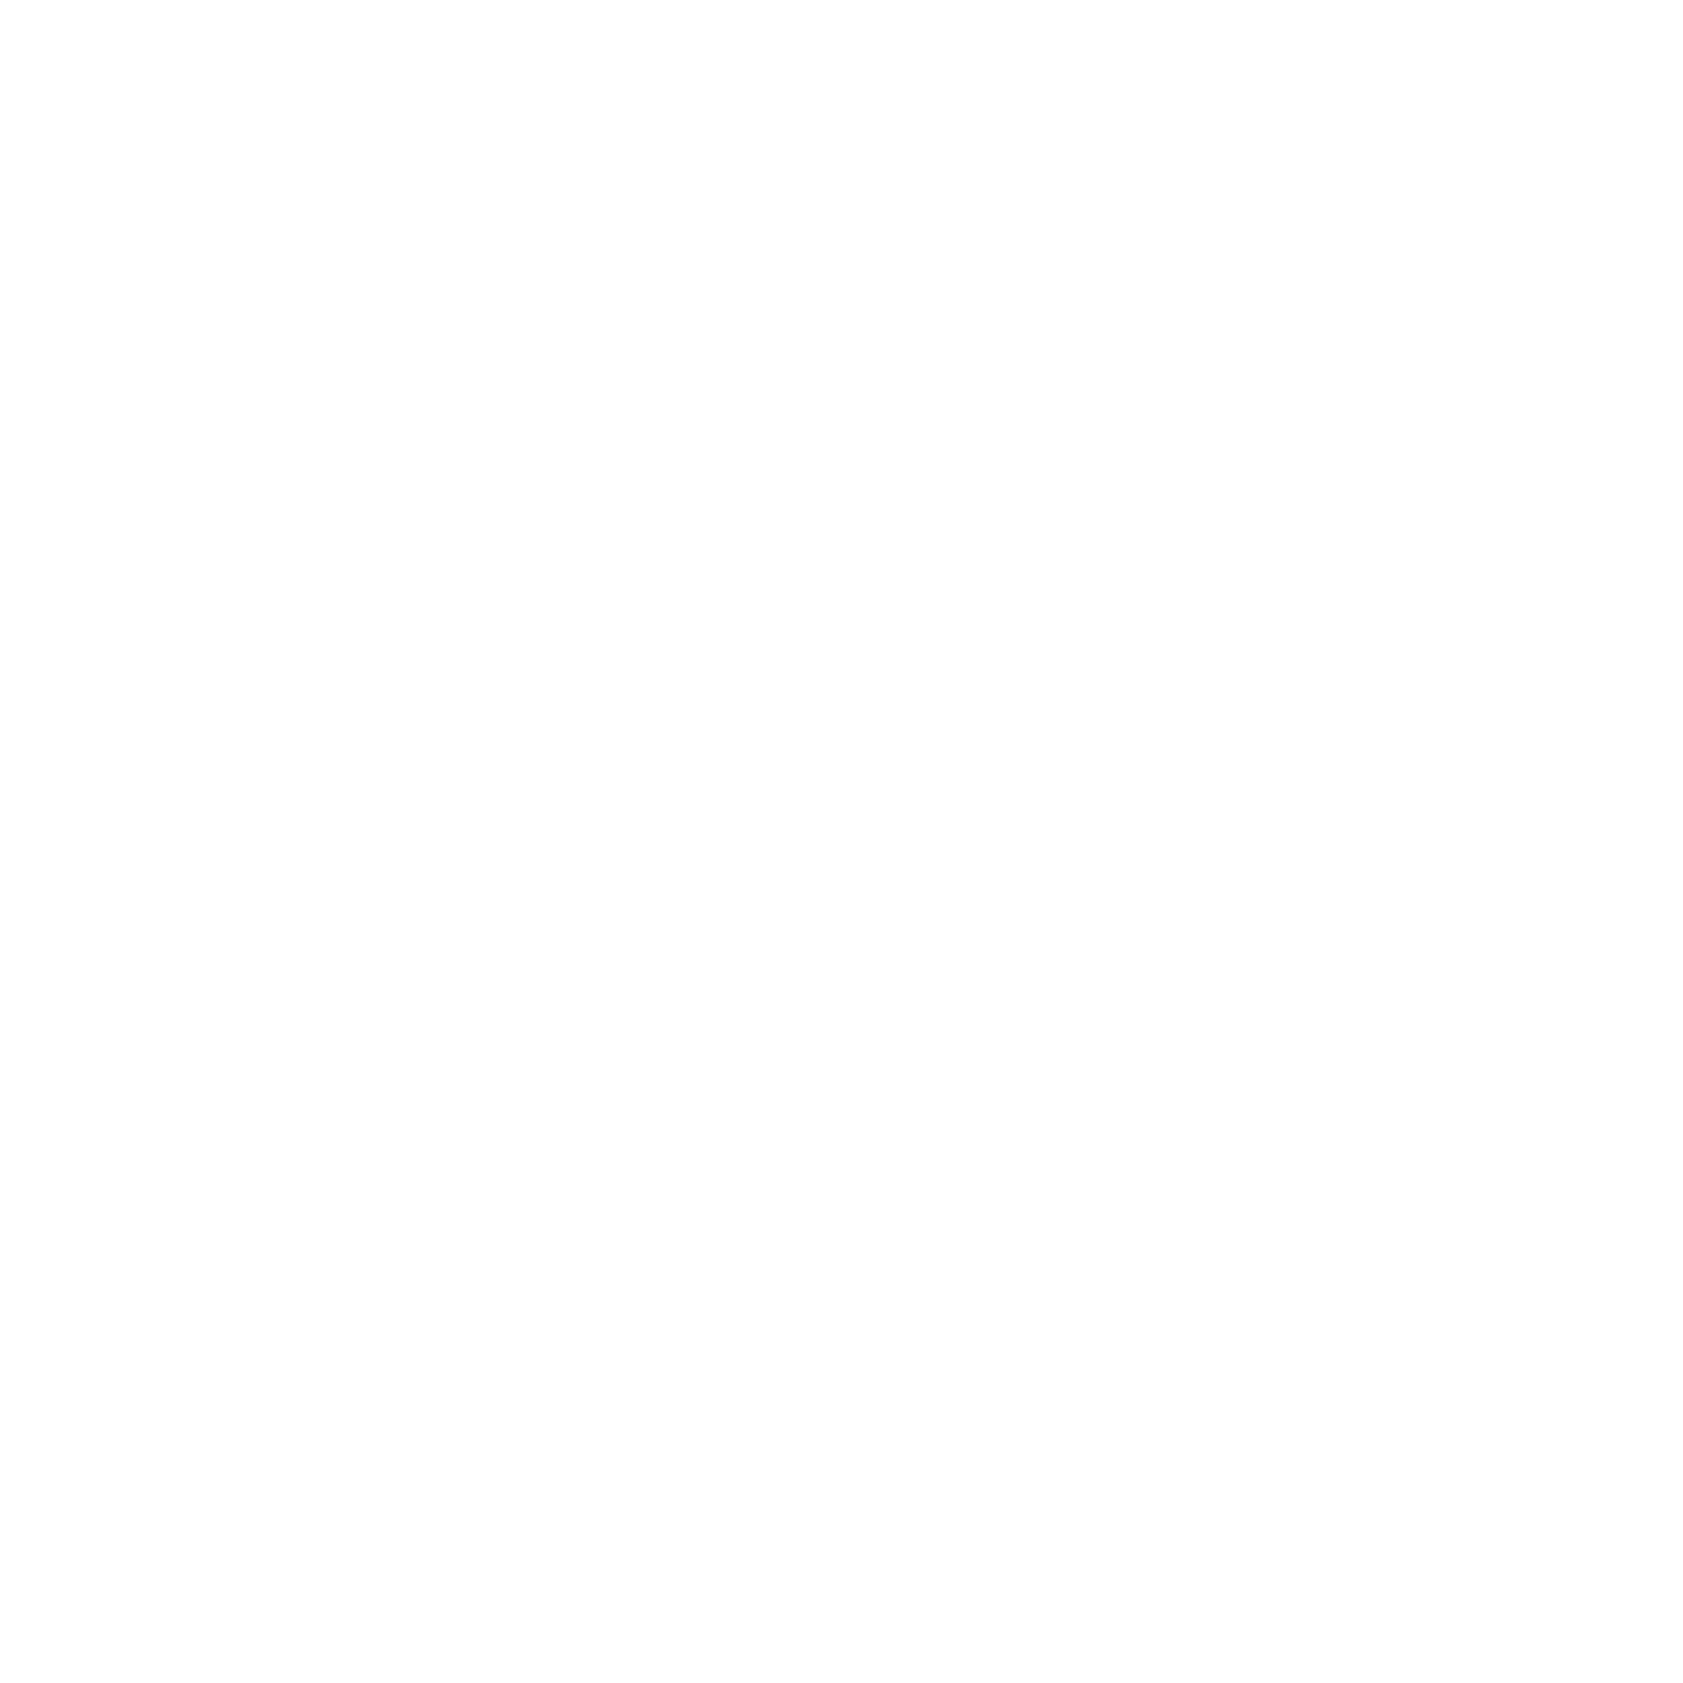 A pie chart section showing that 25% of the sales made from the Futue Heritage Fund go towards educational initiatives.